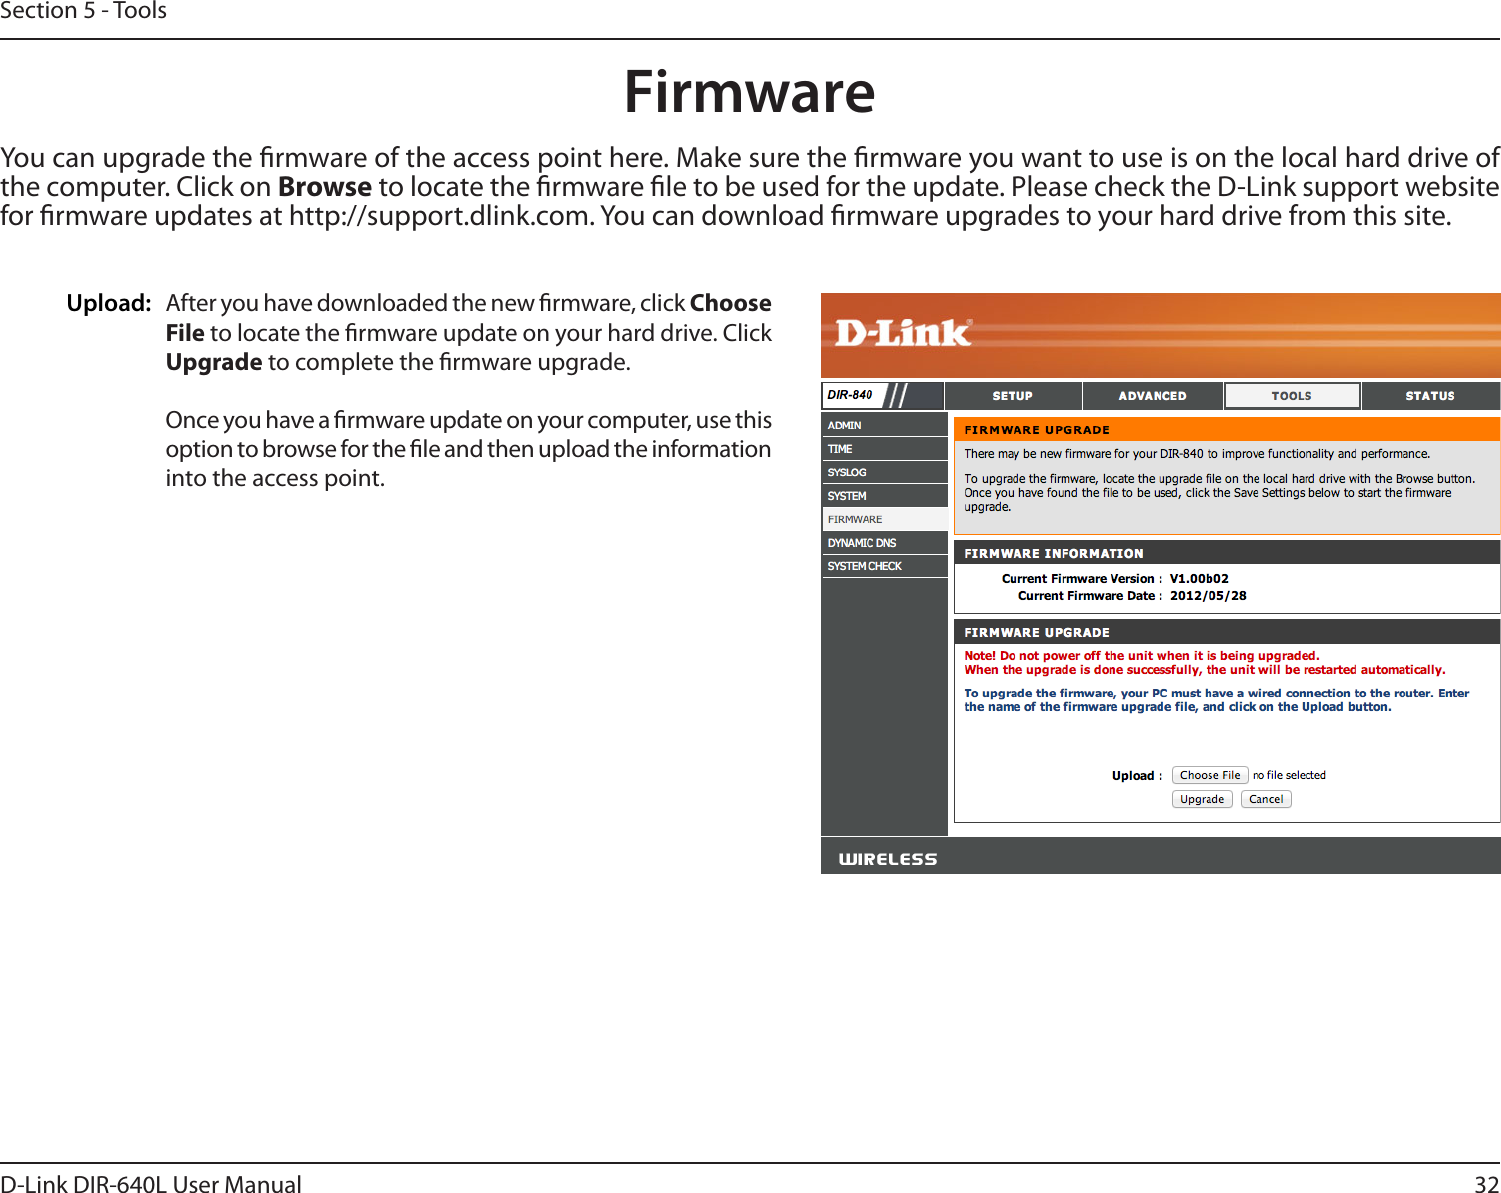 32D-Link DIR-640L User ManualSection 5 - ToolsFirmwareUpload: After you have downloaded the new rmware, click Choose File to locate the rmware update on your hard drive. Click Upgrade to complete the rmware upgrade.Once you have a rmware update on your computer, use this option to browse for the le and then upload the information into the access point. You can upgrade the rmware of the access point here. Make sure the rmware you want to use is on the local hard drive of the computer. Click on Browse to locate the rmware le to be used for the update. Please check the D-Link support website for rmware updates at http://support.dlink.com. You can download rmware upgrades to your hard drive from this site.